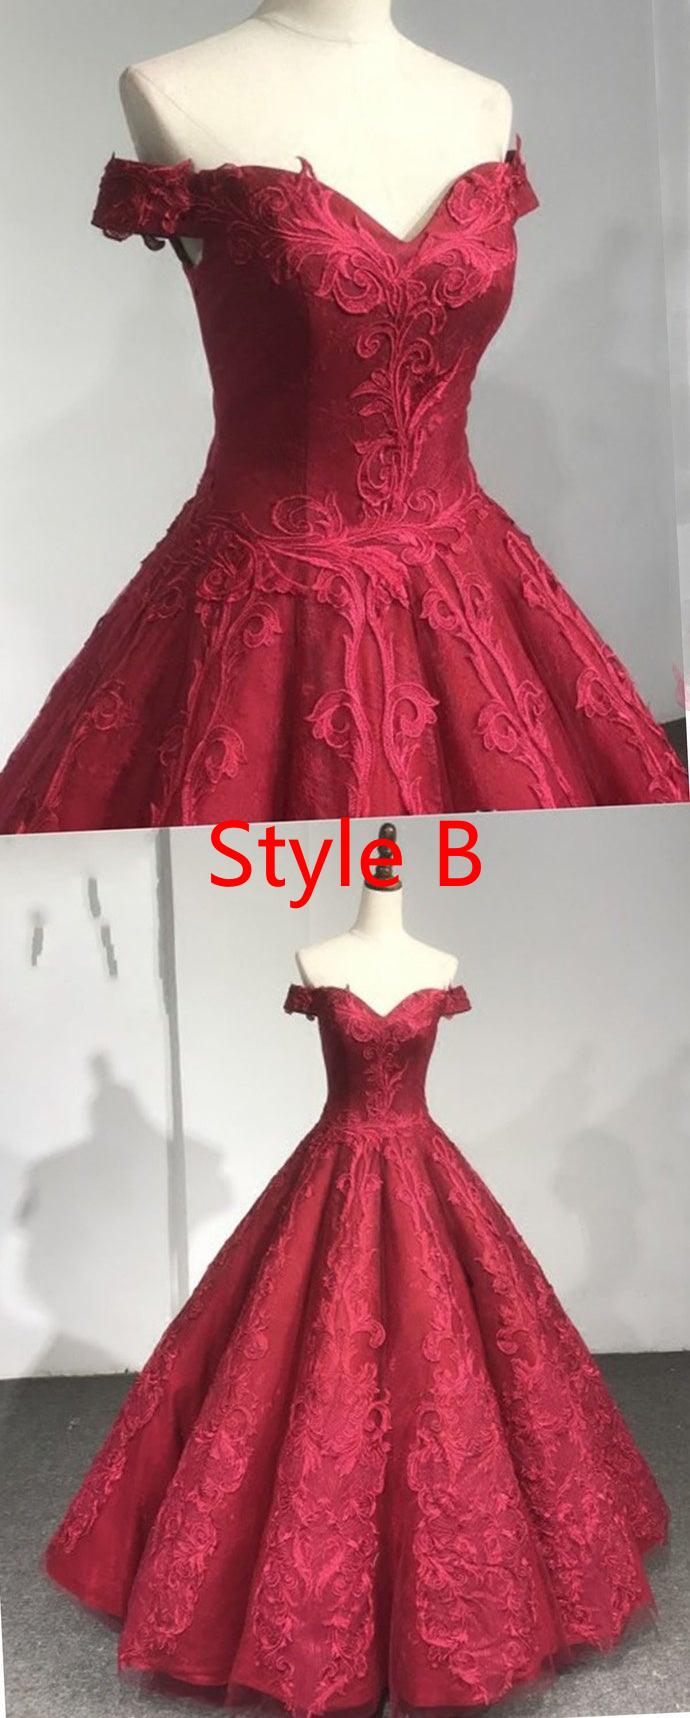 Pleated Dress, Gorgeous Pink Off The Shoulder Ball Gown Prom Dresses With Appliques